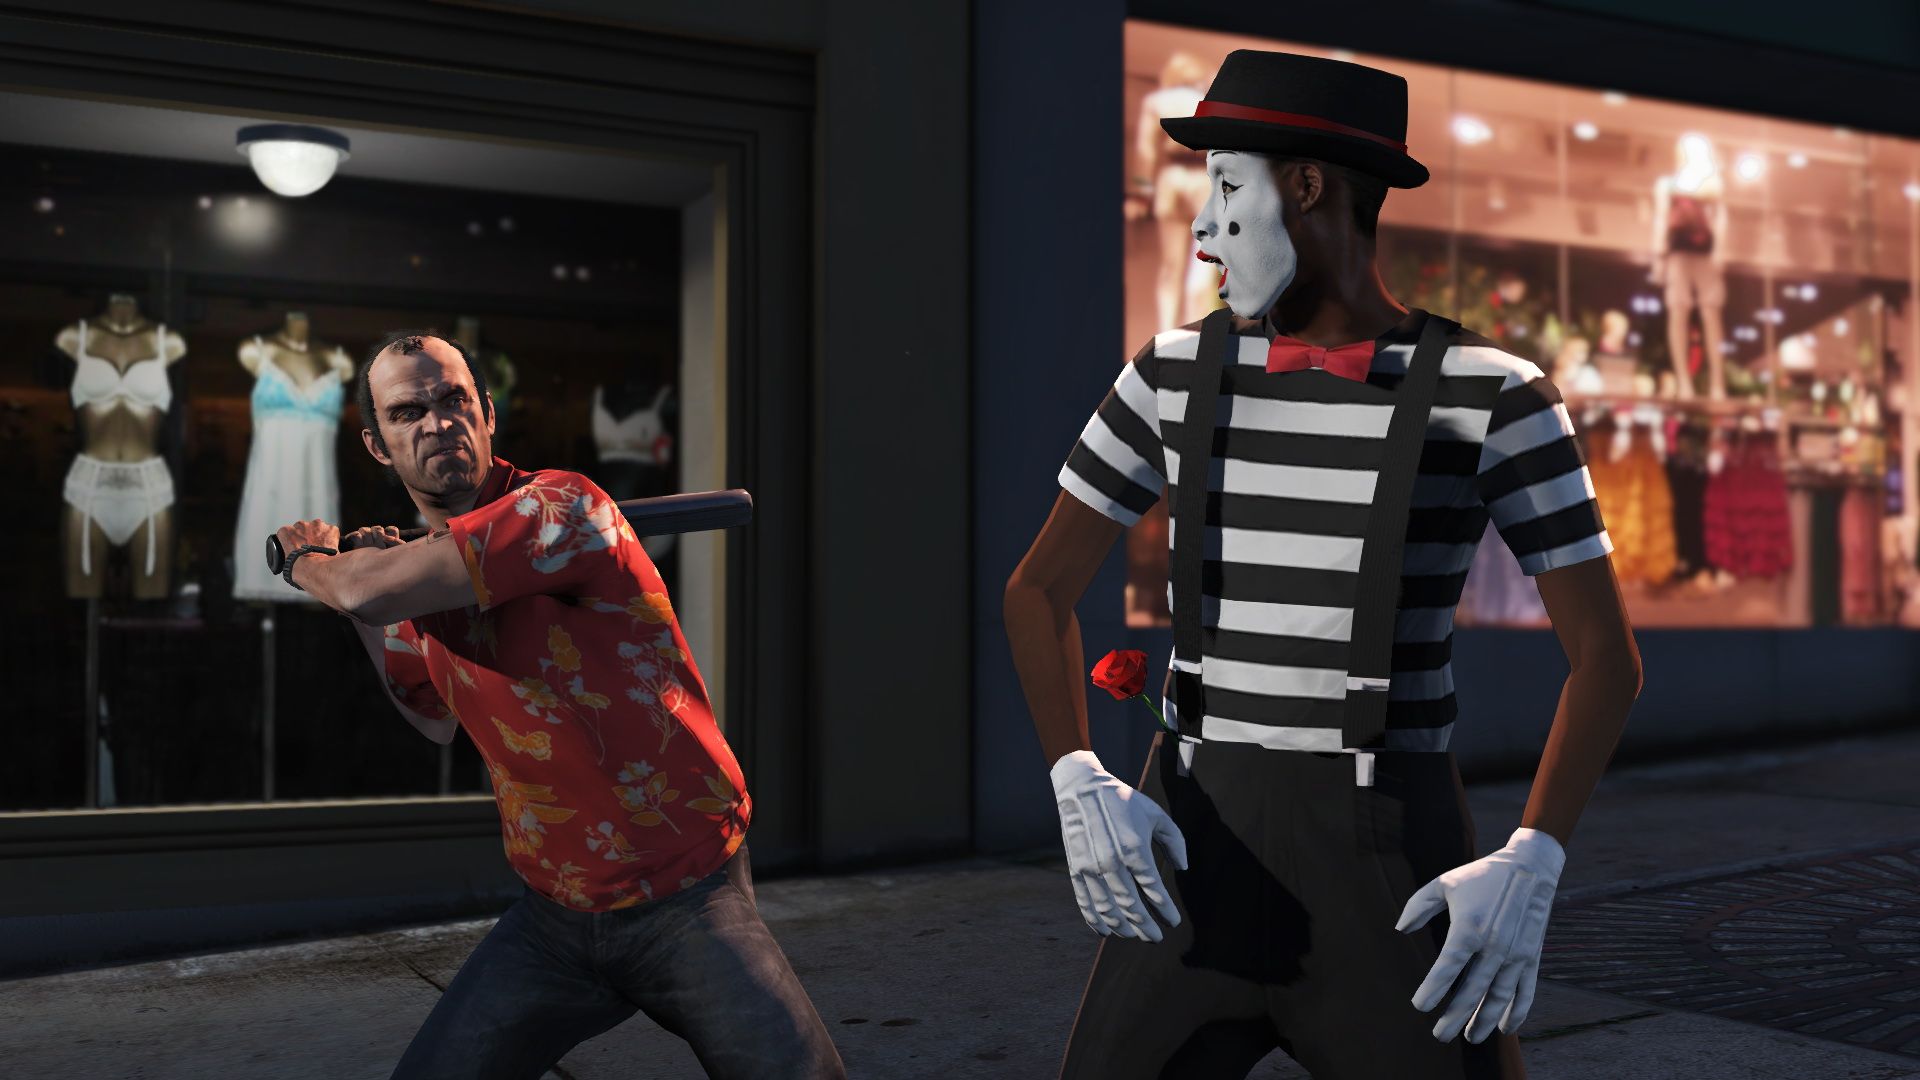 grand theft auto 5 review image 8